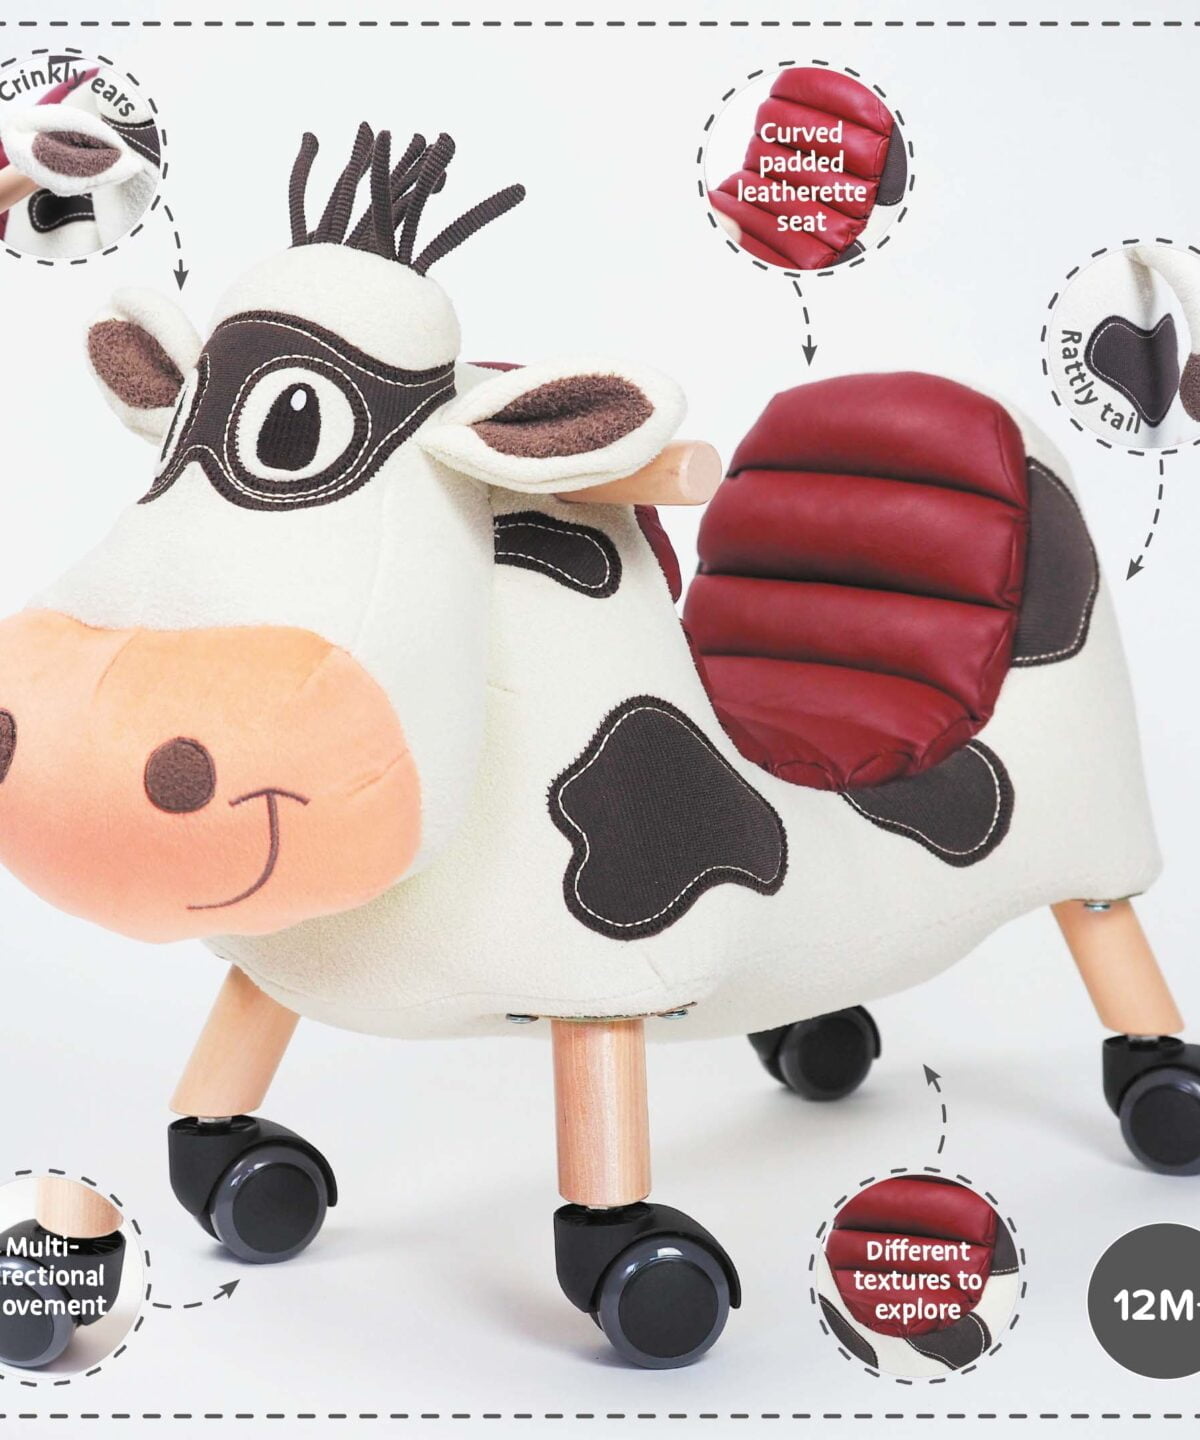 Features and benefits displayed for Moobert Cow Ride On Toy